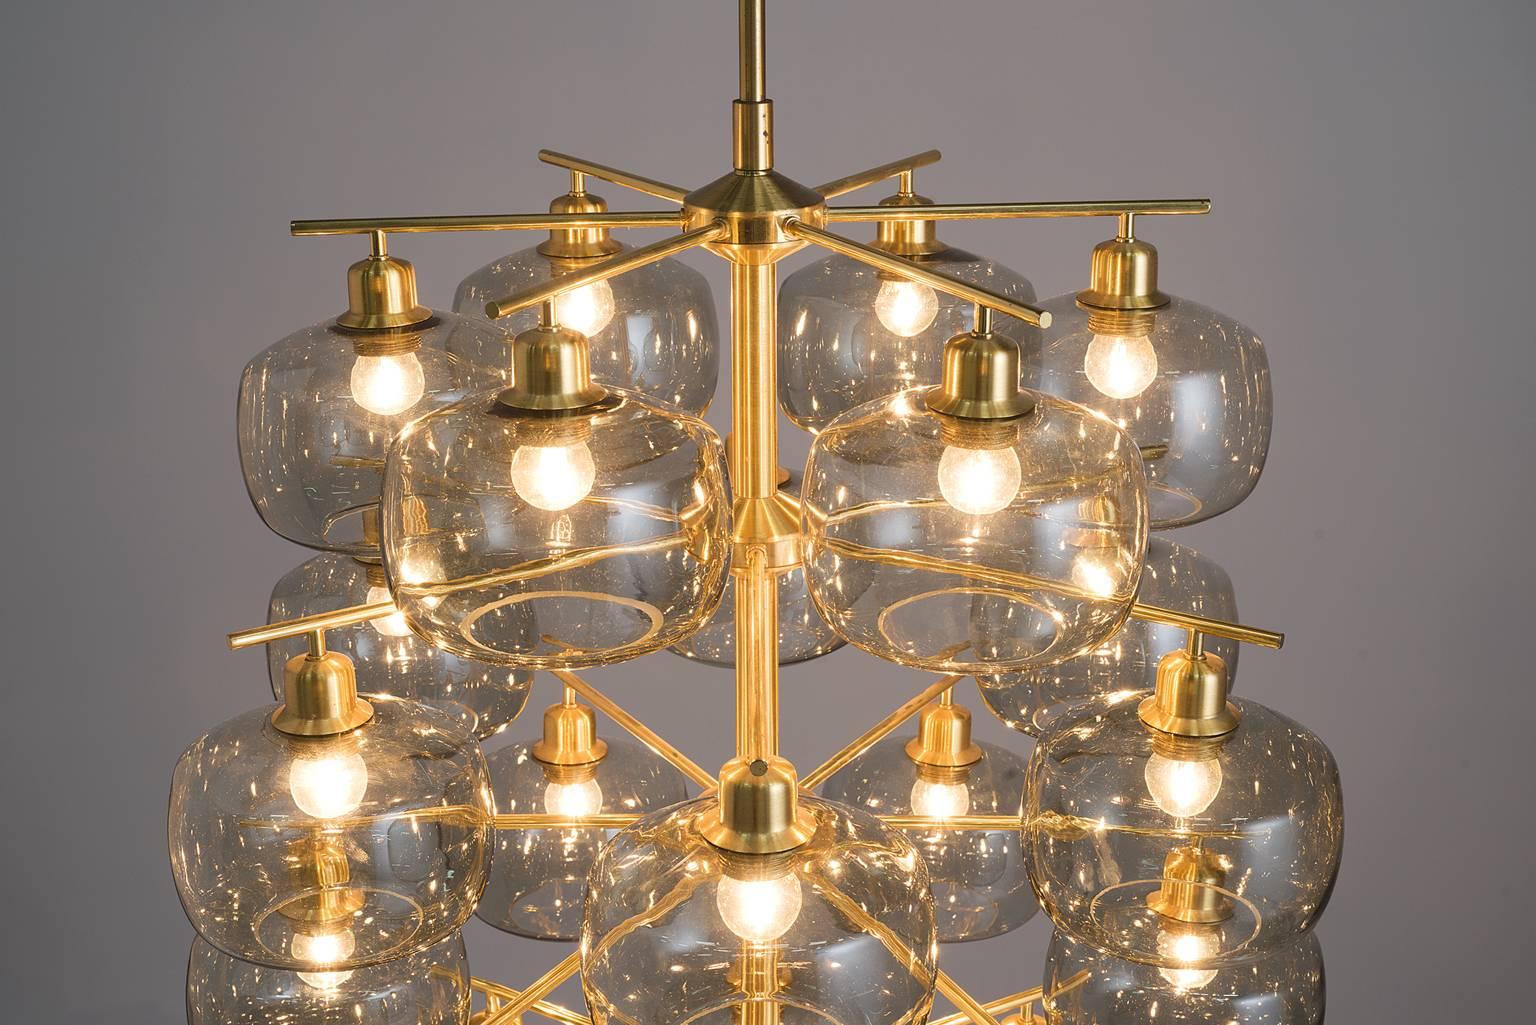 Brass Large Swedish Chandeliers by Holger Johansson, 1952